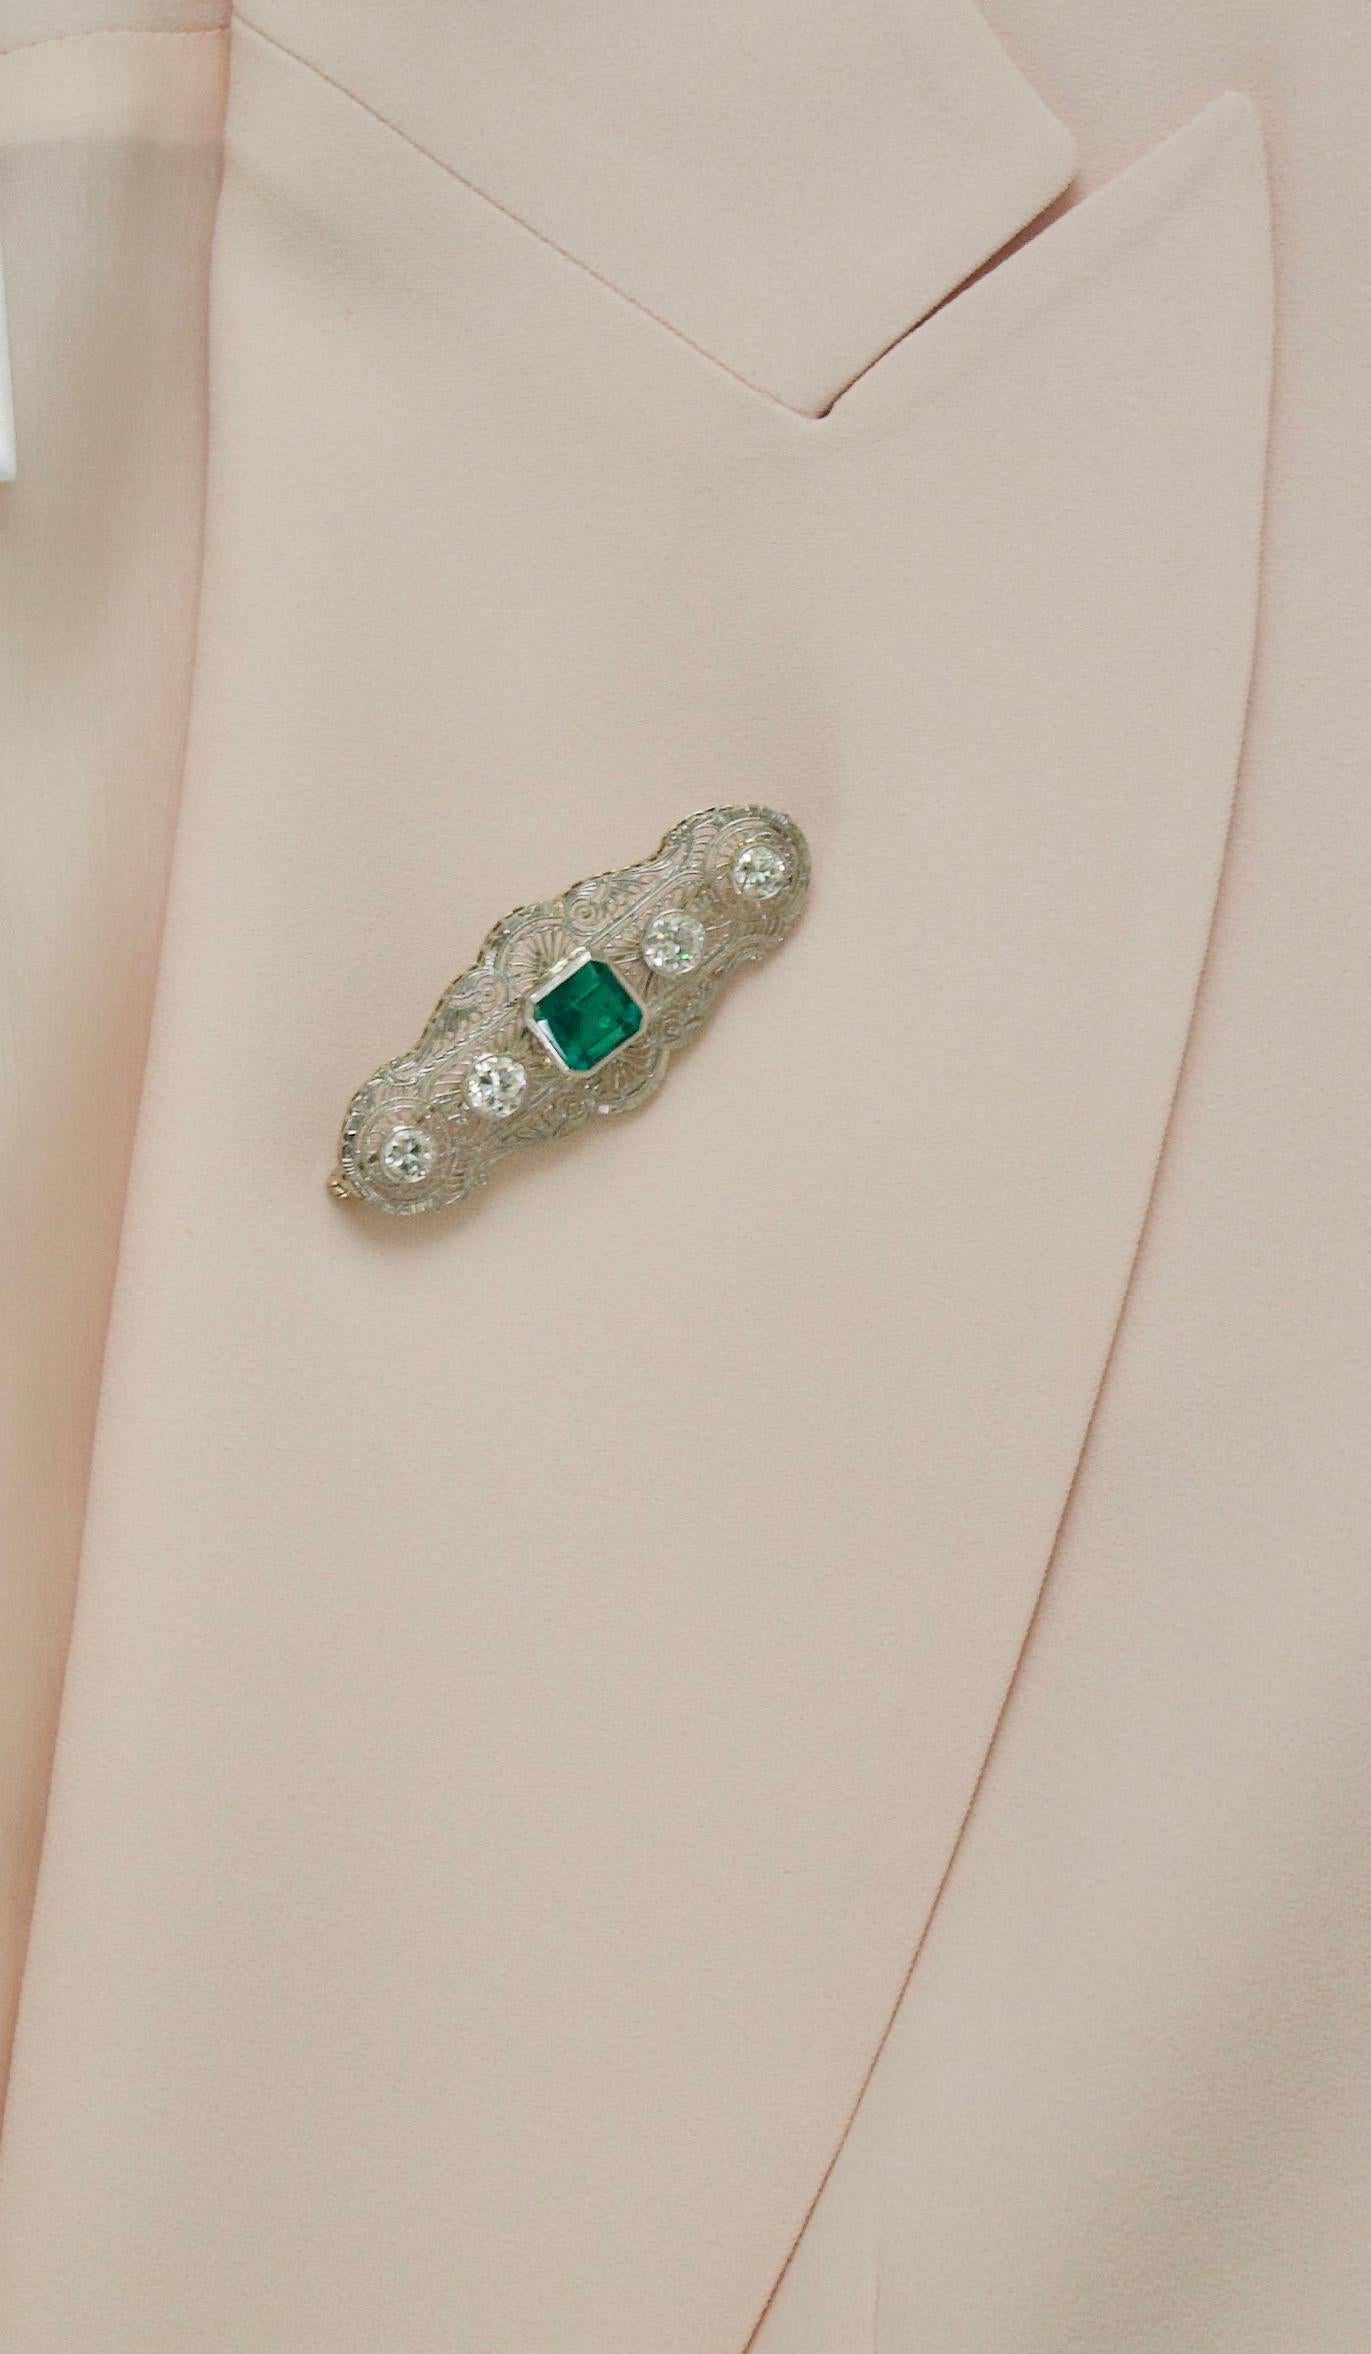 Emerald Cut Colombian Emerald and Diamond Necklace / Brooch circa 1920s GIA Certified For Sale